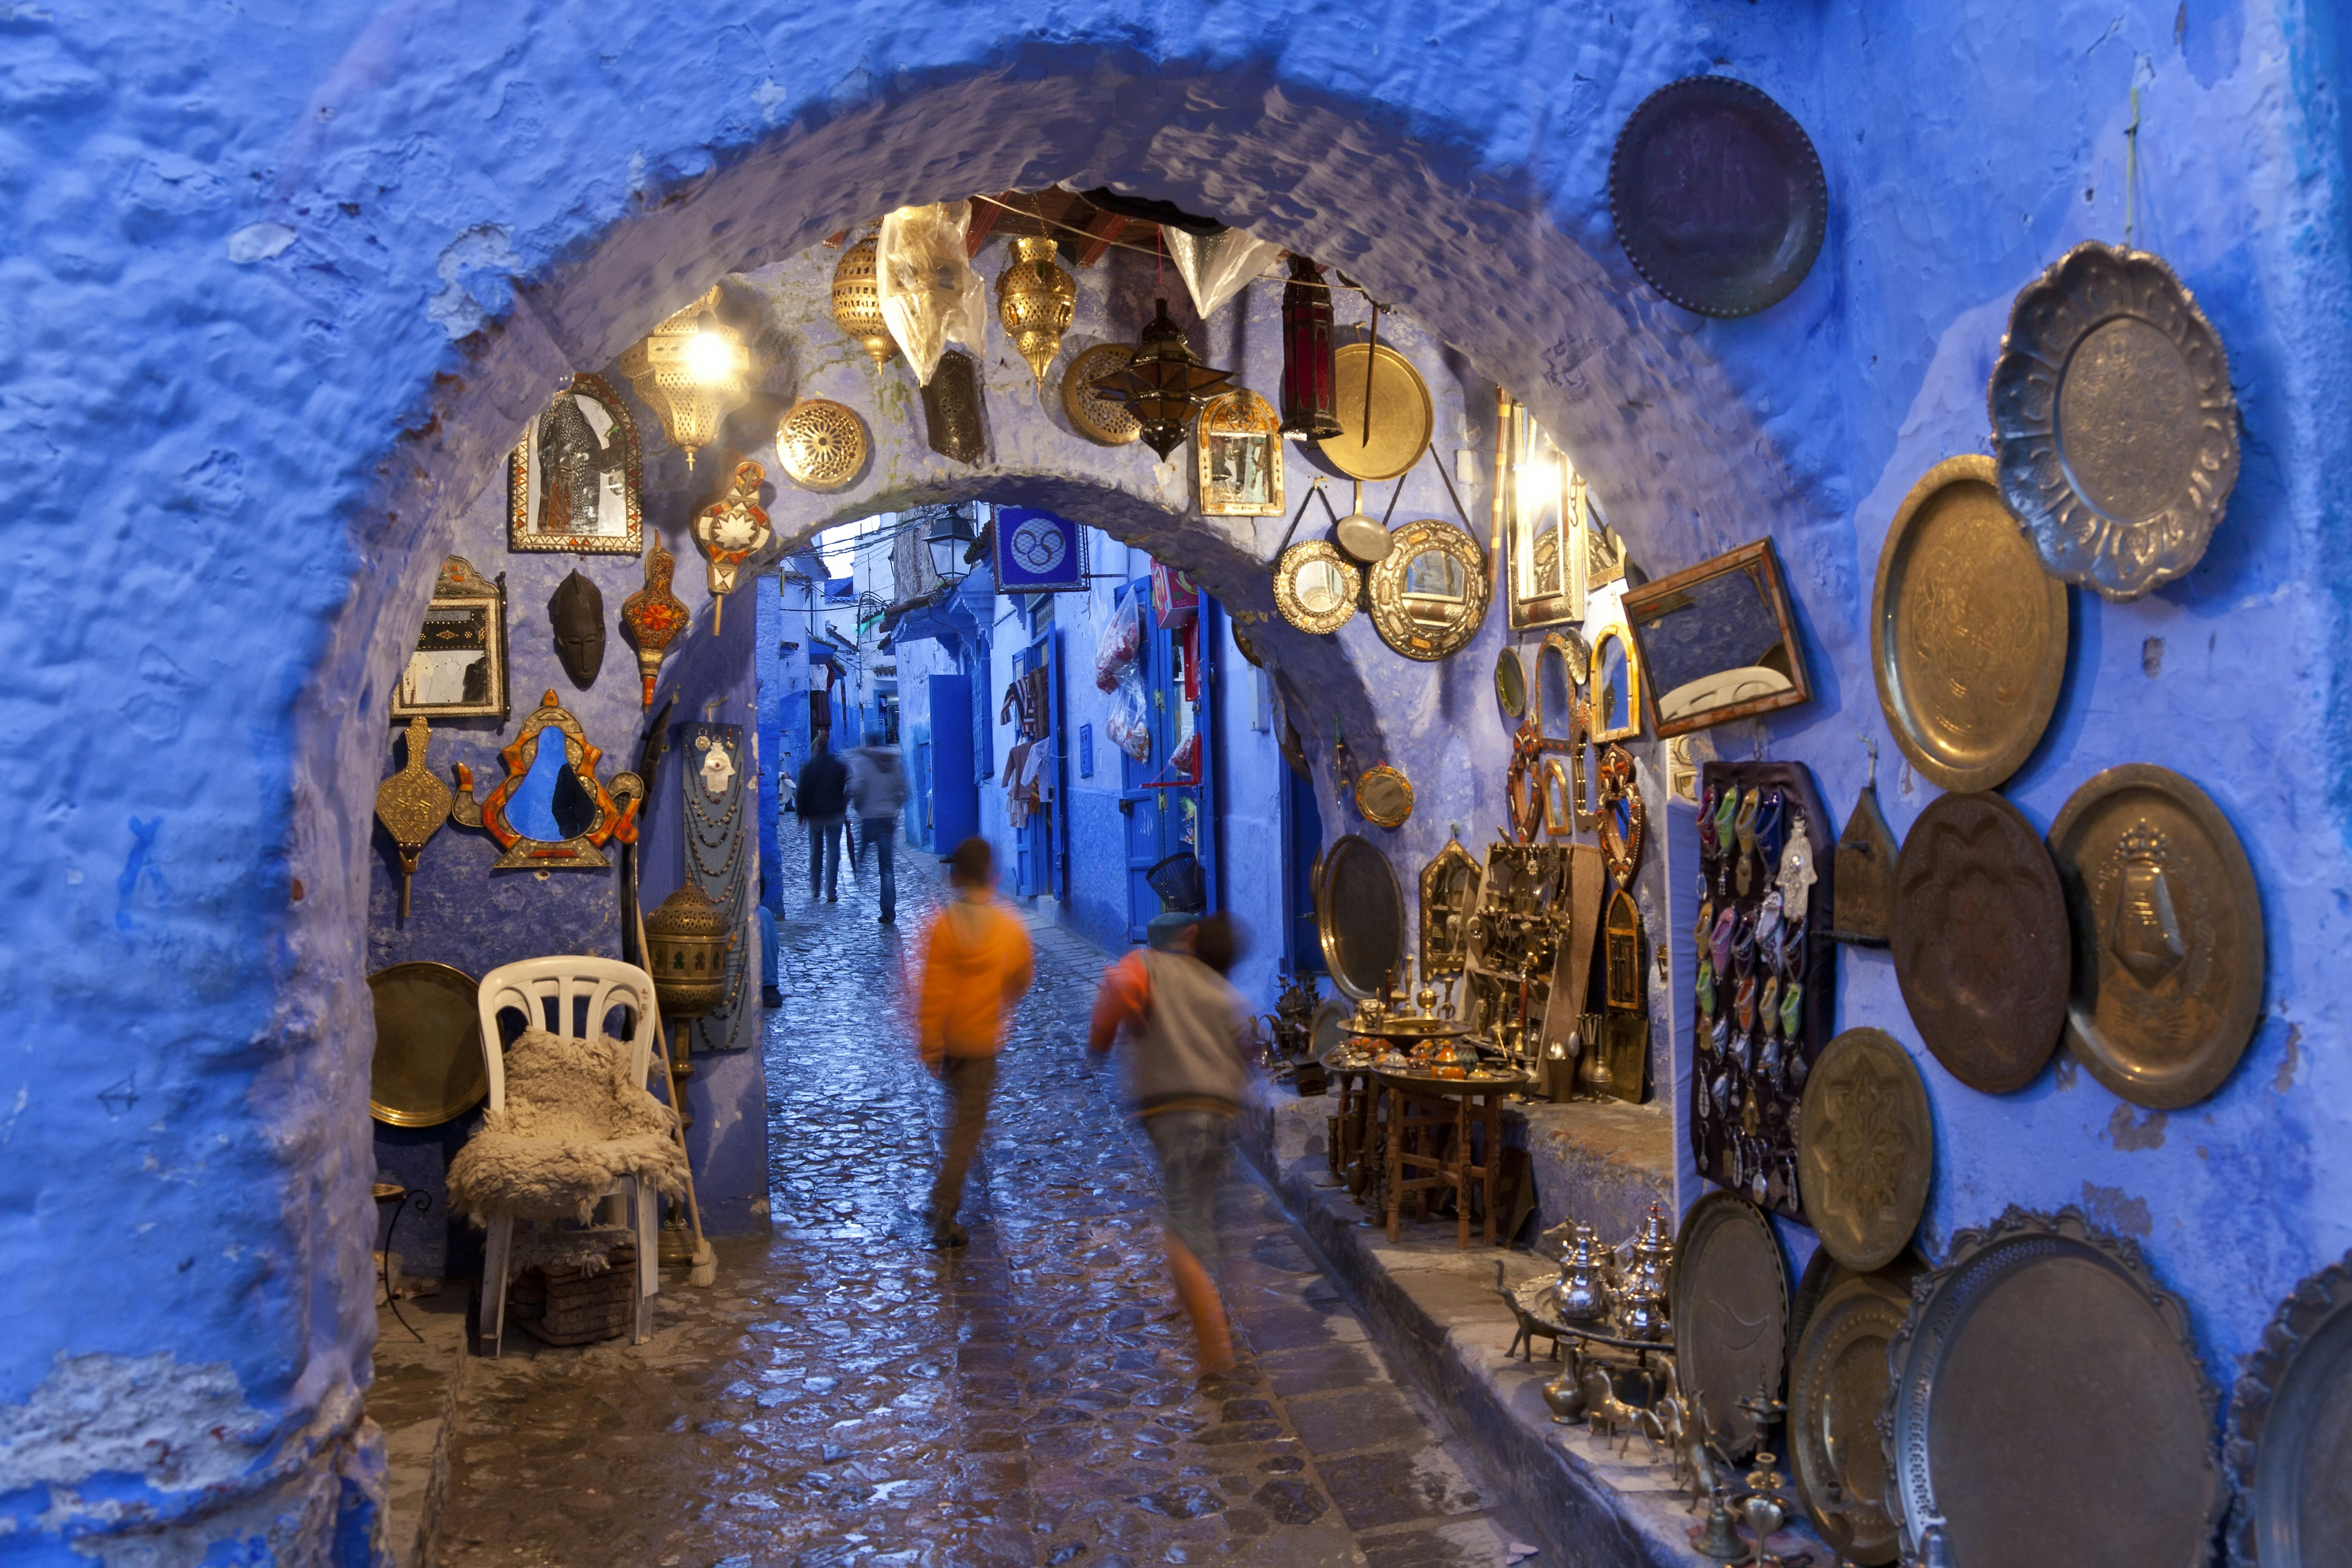 Two children in orange and grey clothes are blurred as the spring through the cobblestone streets of Chefchaouen, surrounded by the blue plaster walls of the medina and shining metal serving treys, mirrors, and other craft goods